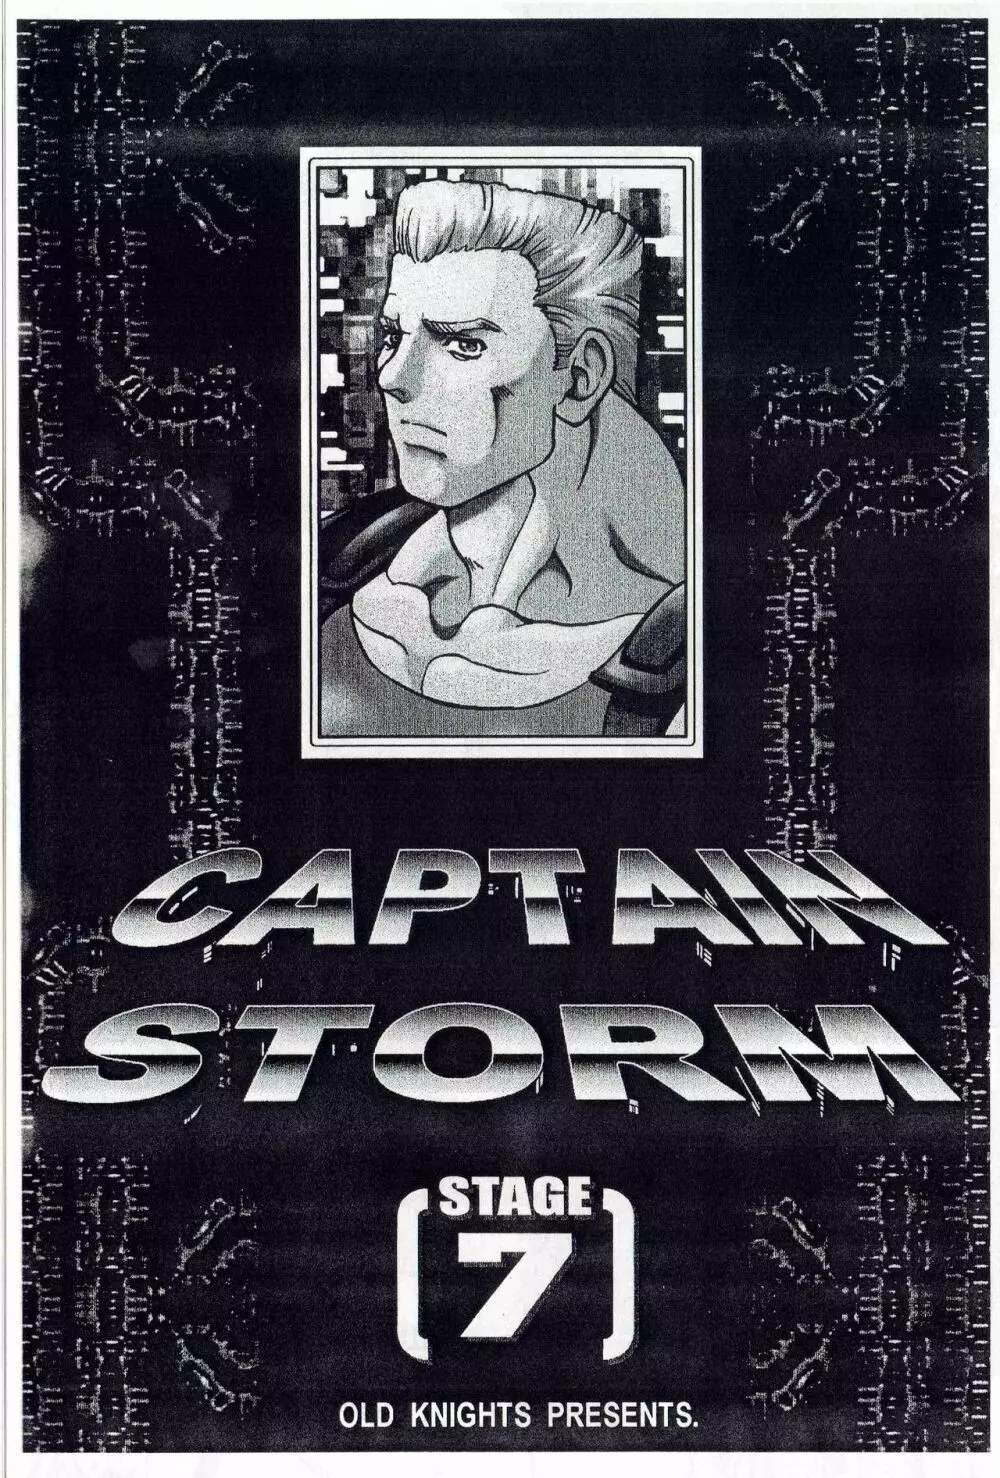 CAPTAIN STORM STAGE 7 - page2